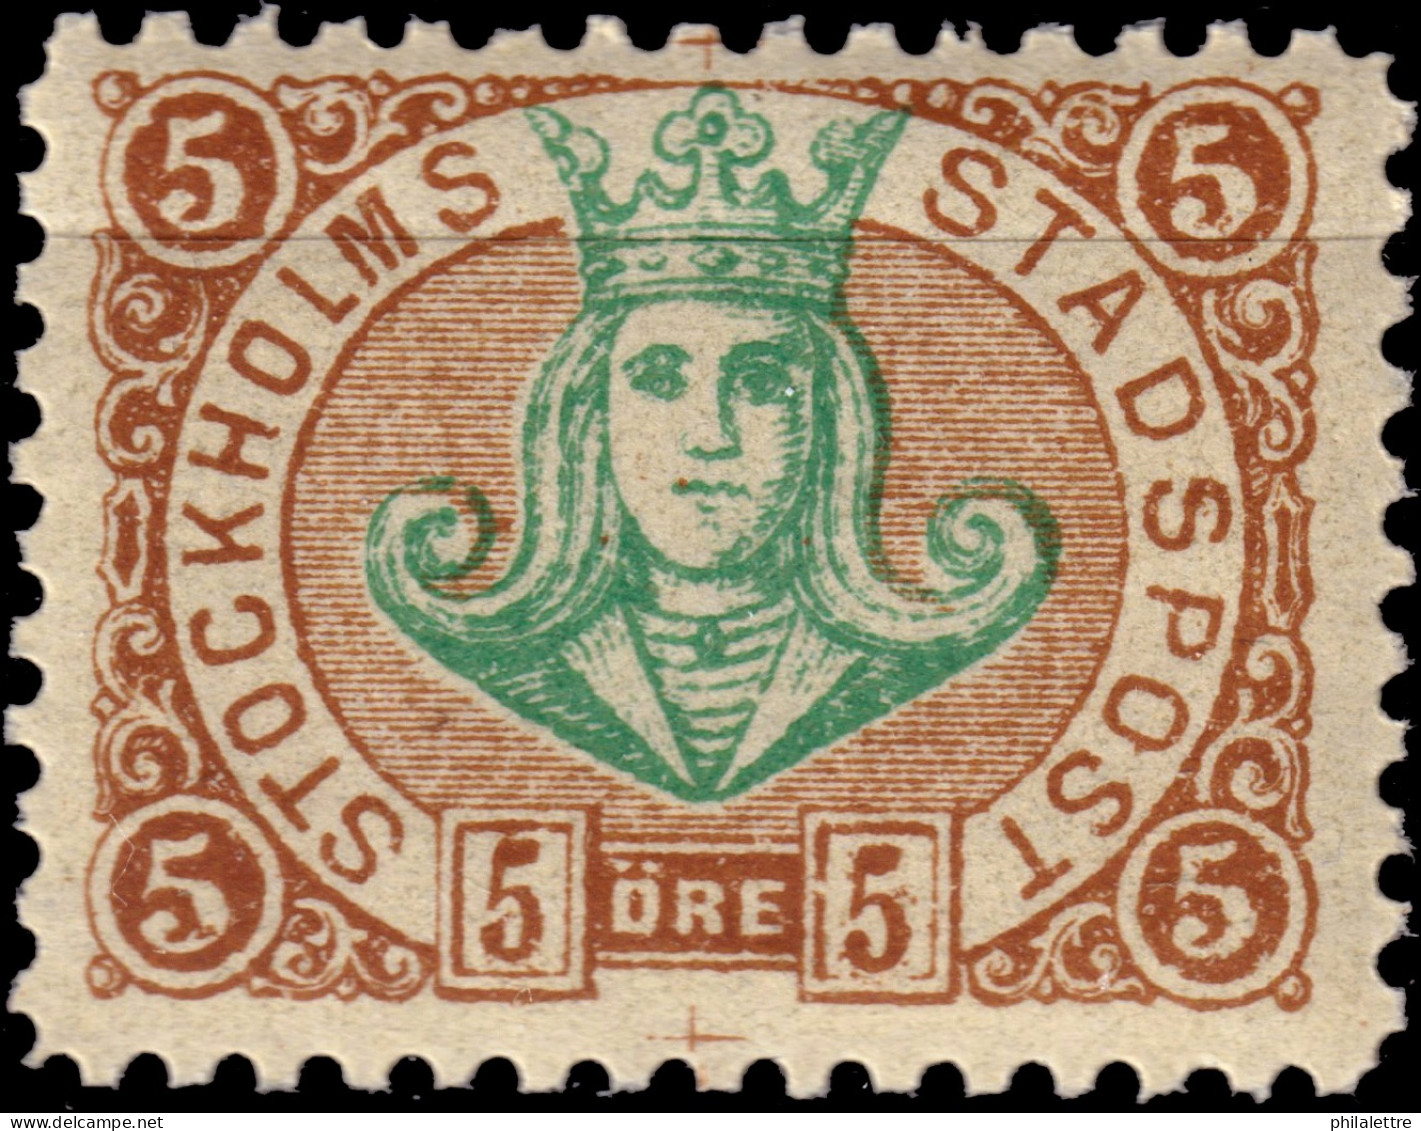 SUÈDE / SWEDEN - Local Post STOCKHOLM 5öre Green & Yell.-brown (1887) - Mint NH** - Local Post Stamps